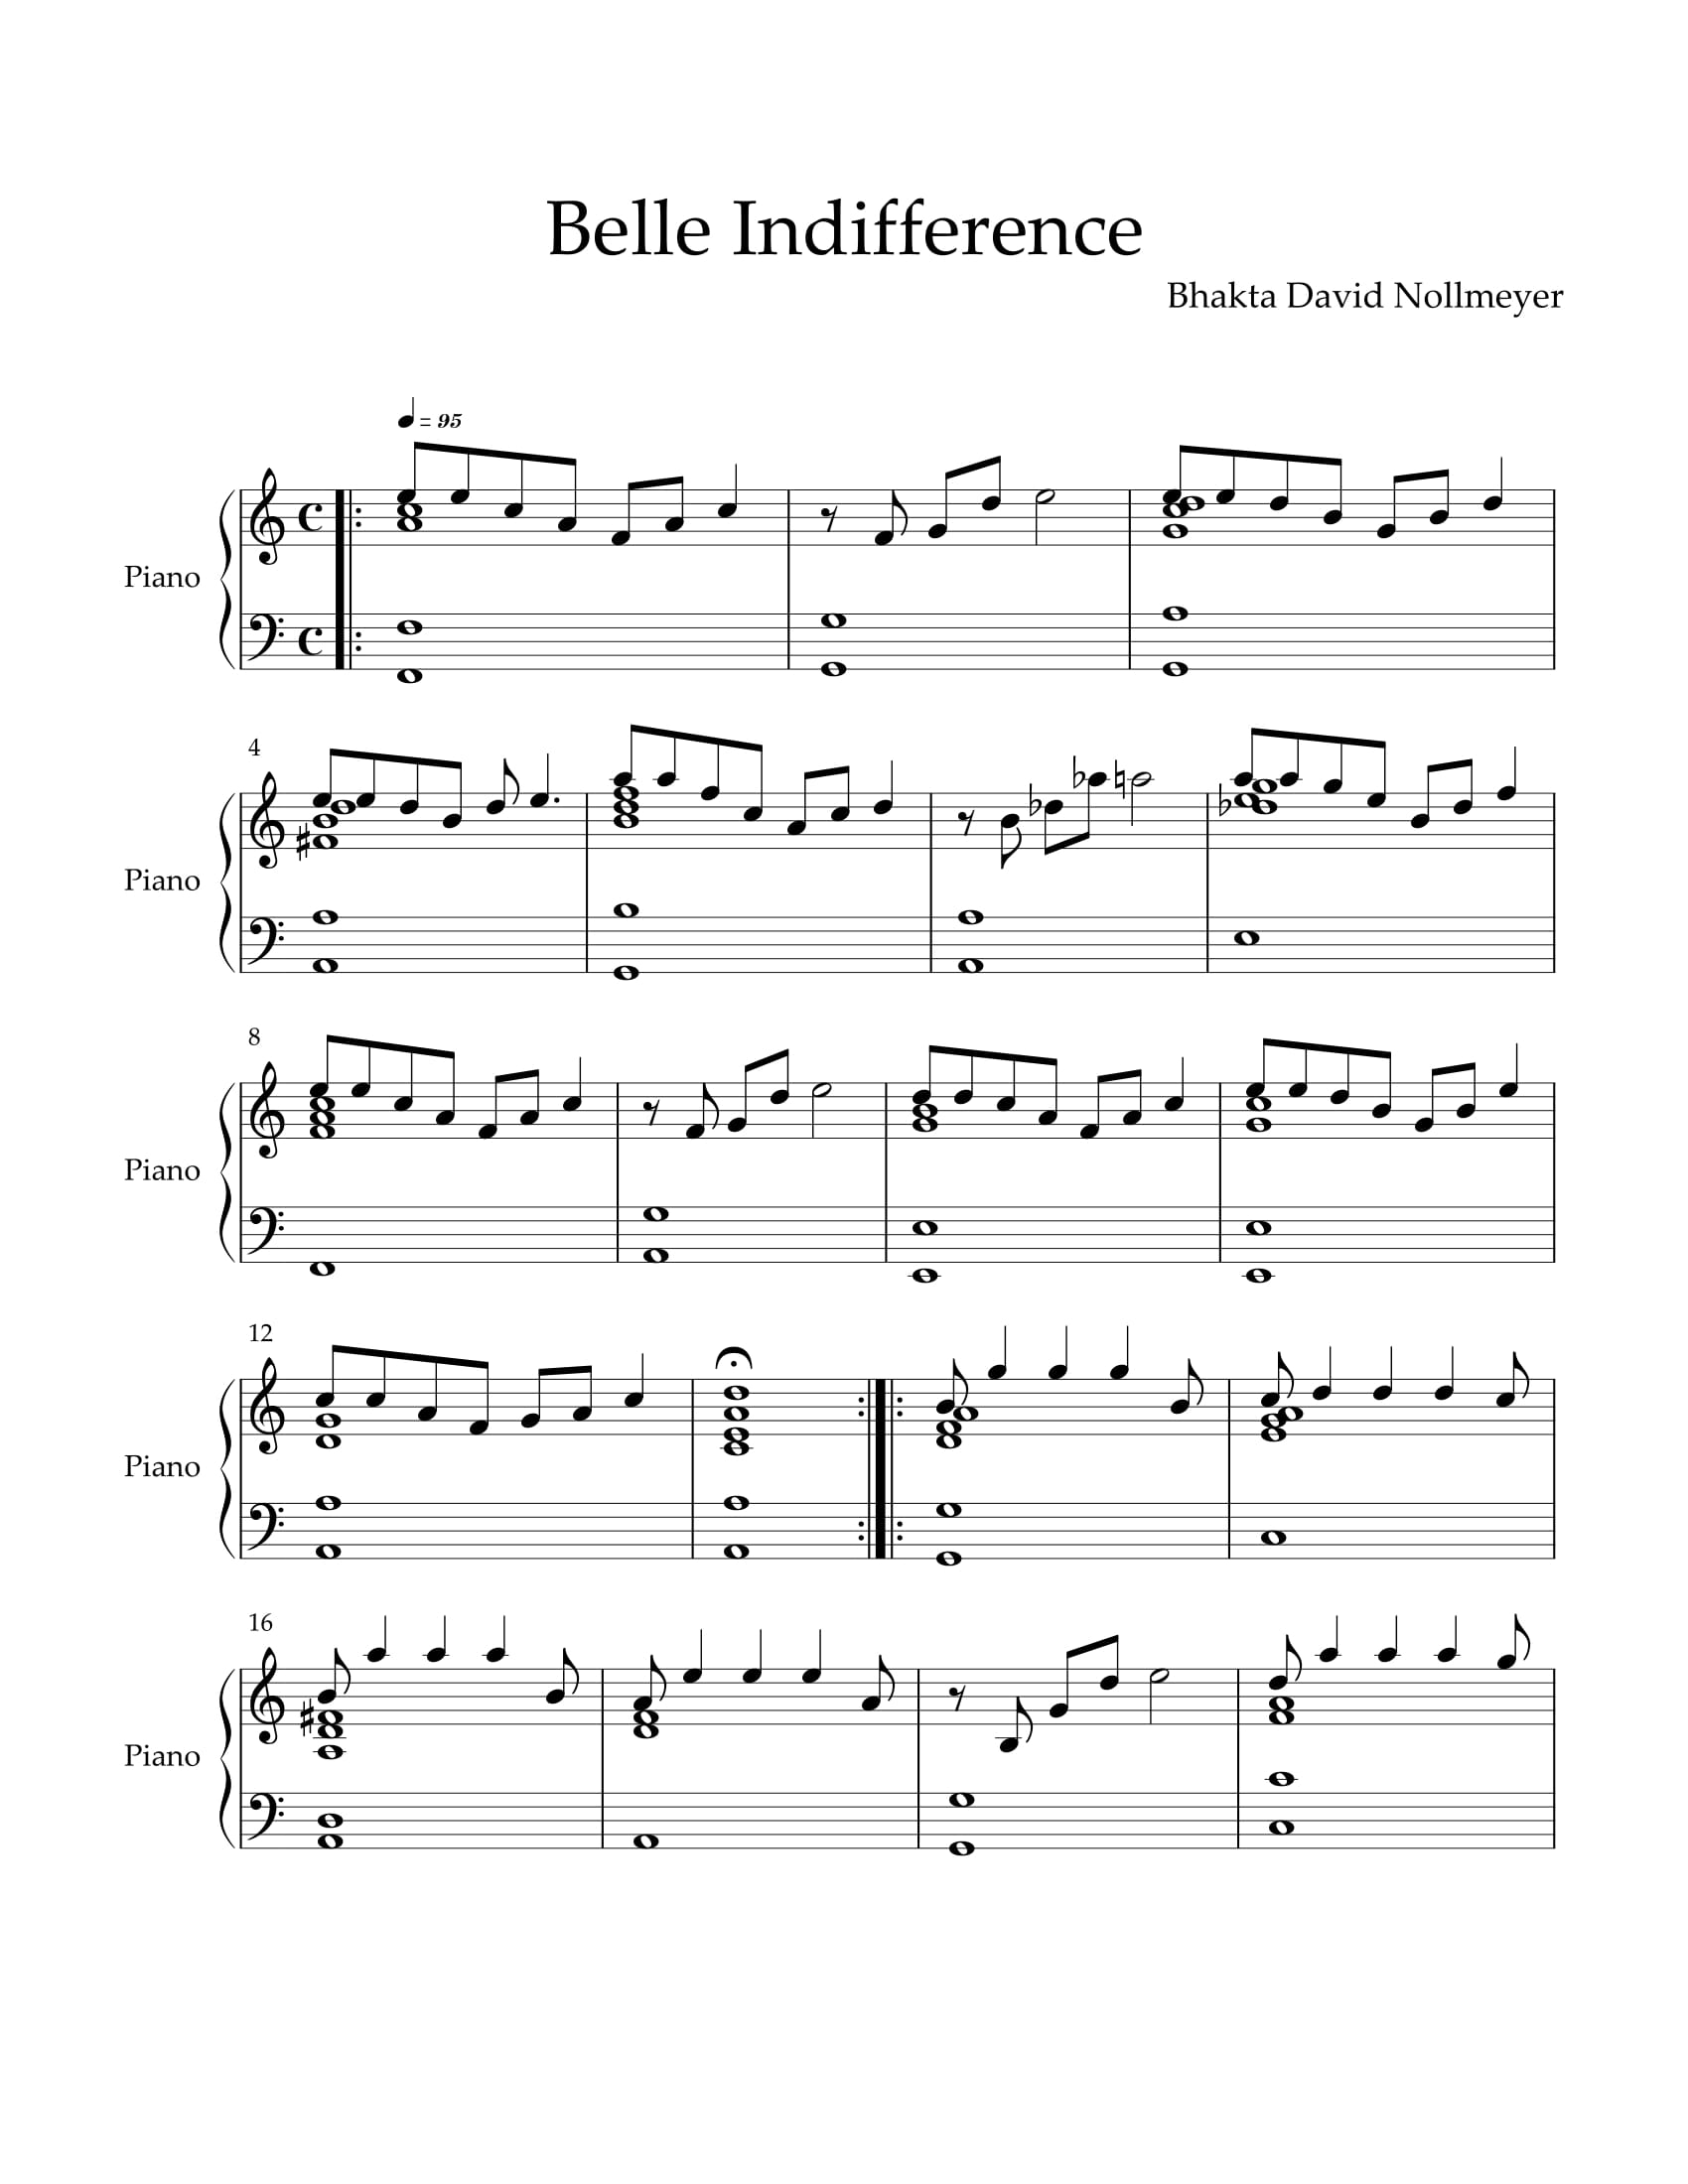 Belle Indifference Piano.1